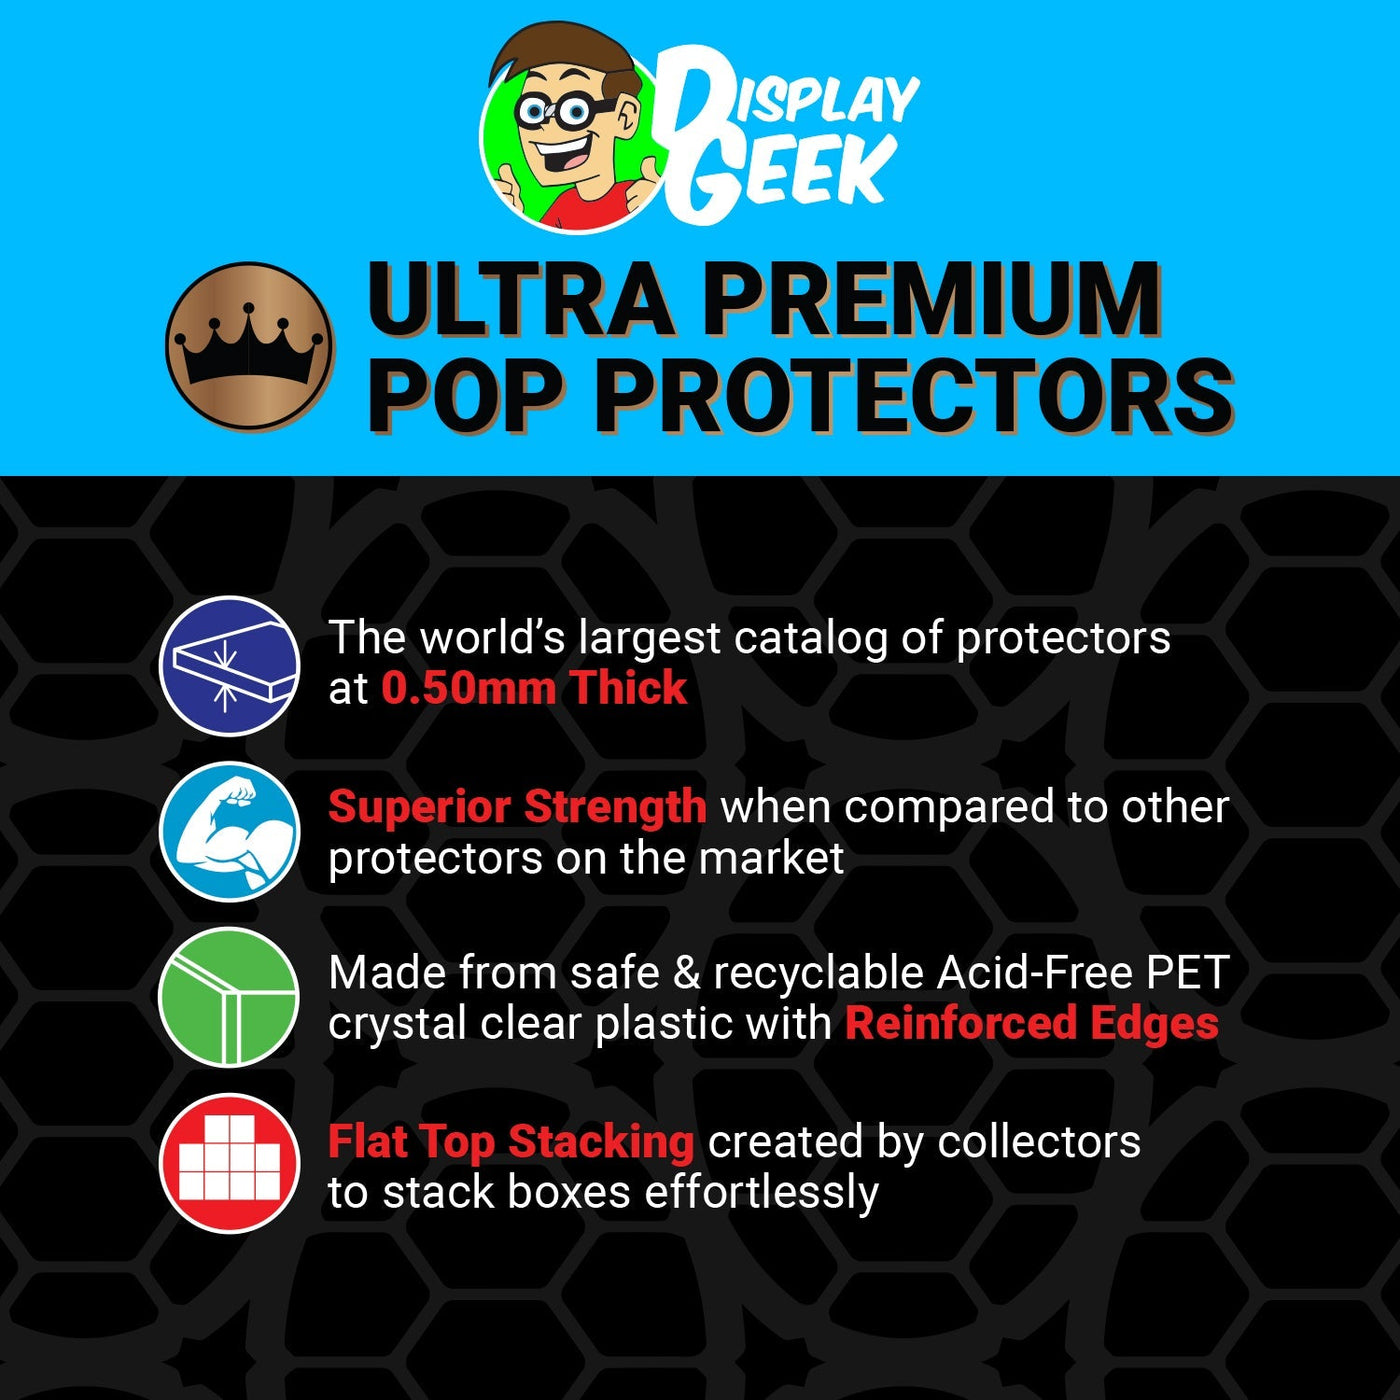 Pop Protector for 9 inch Giant Steamboat Willie Blue & Red Redux D23 Expo Funko on The Protector Guide App by Display Geek